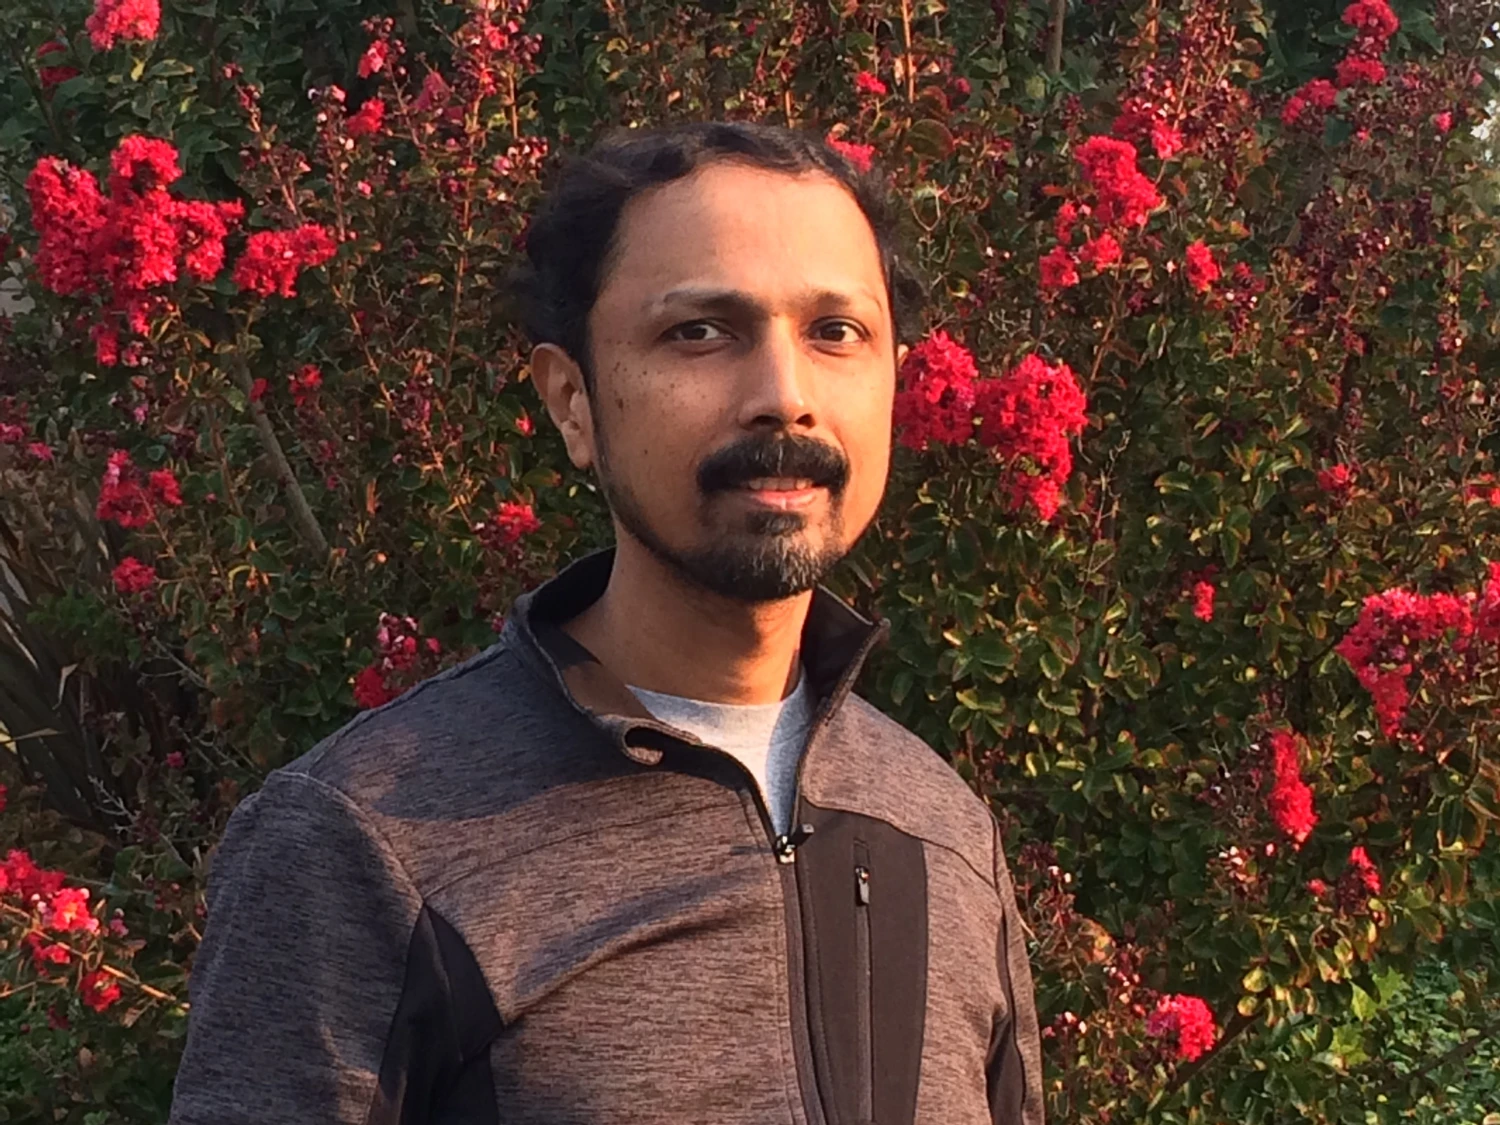 Biju Nair is a Distributed Systems Engineer at Bloomberg.